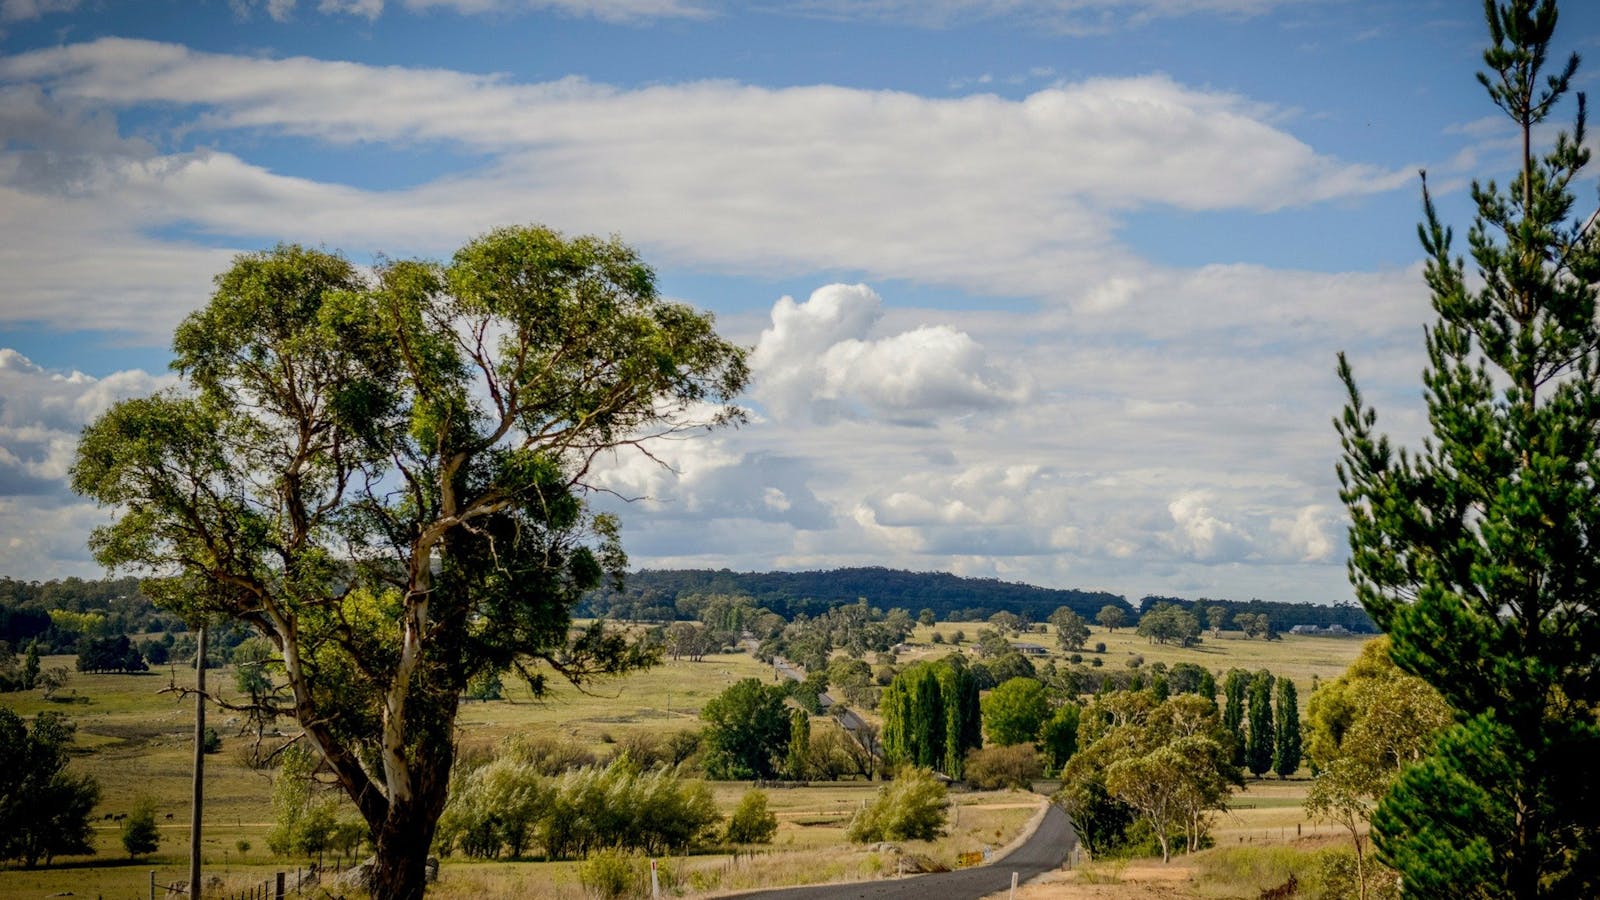 Main Road 92 passes through picturesque farming country on the way to the Shoalhaven Coast.